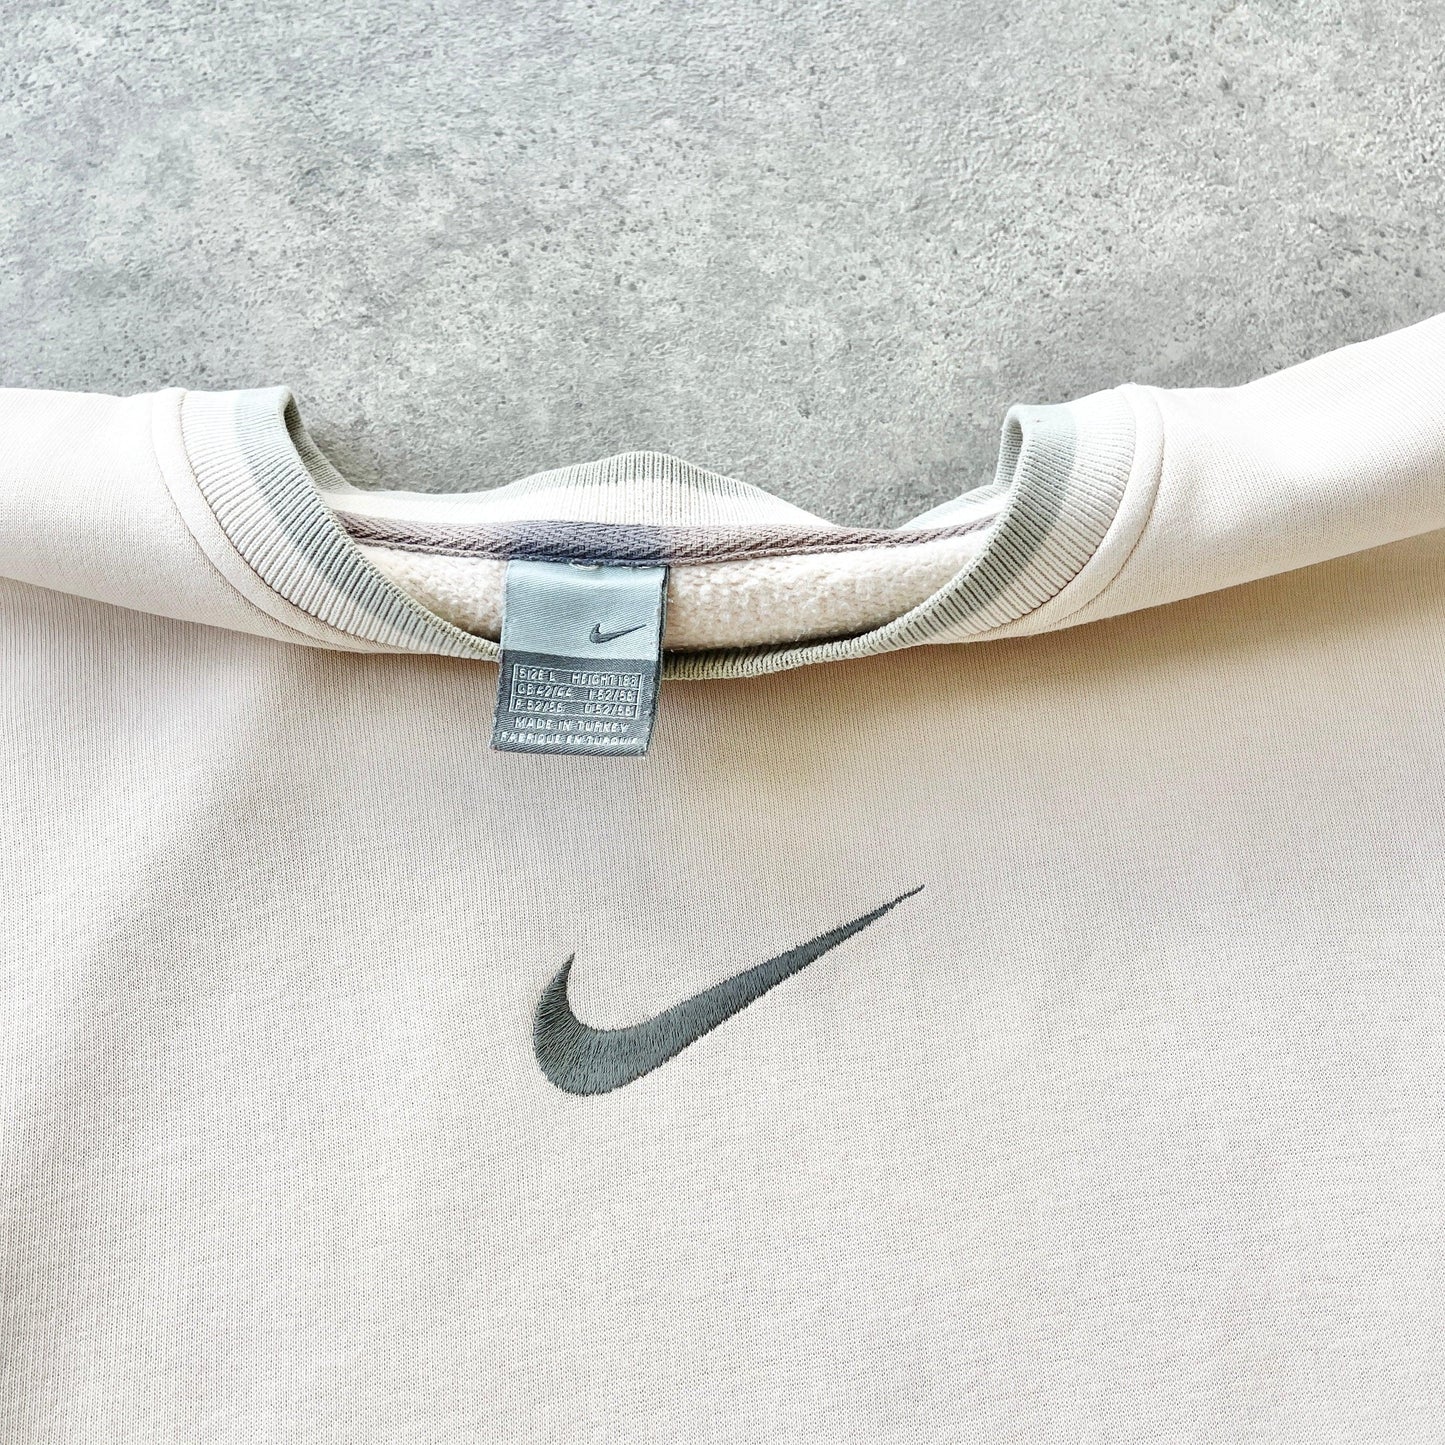 Nike RARE 2000s heavyweight embroidered sweatshirt (L) - Known Source